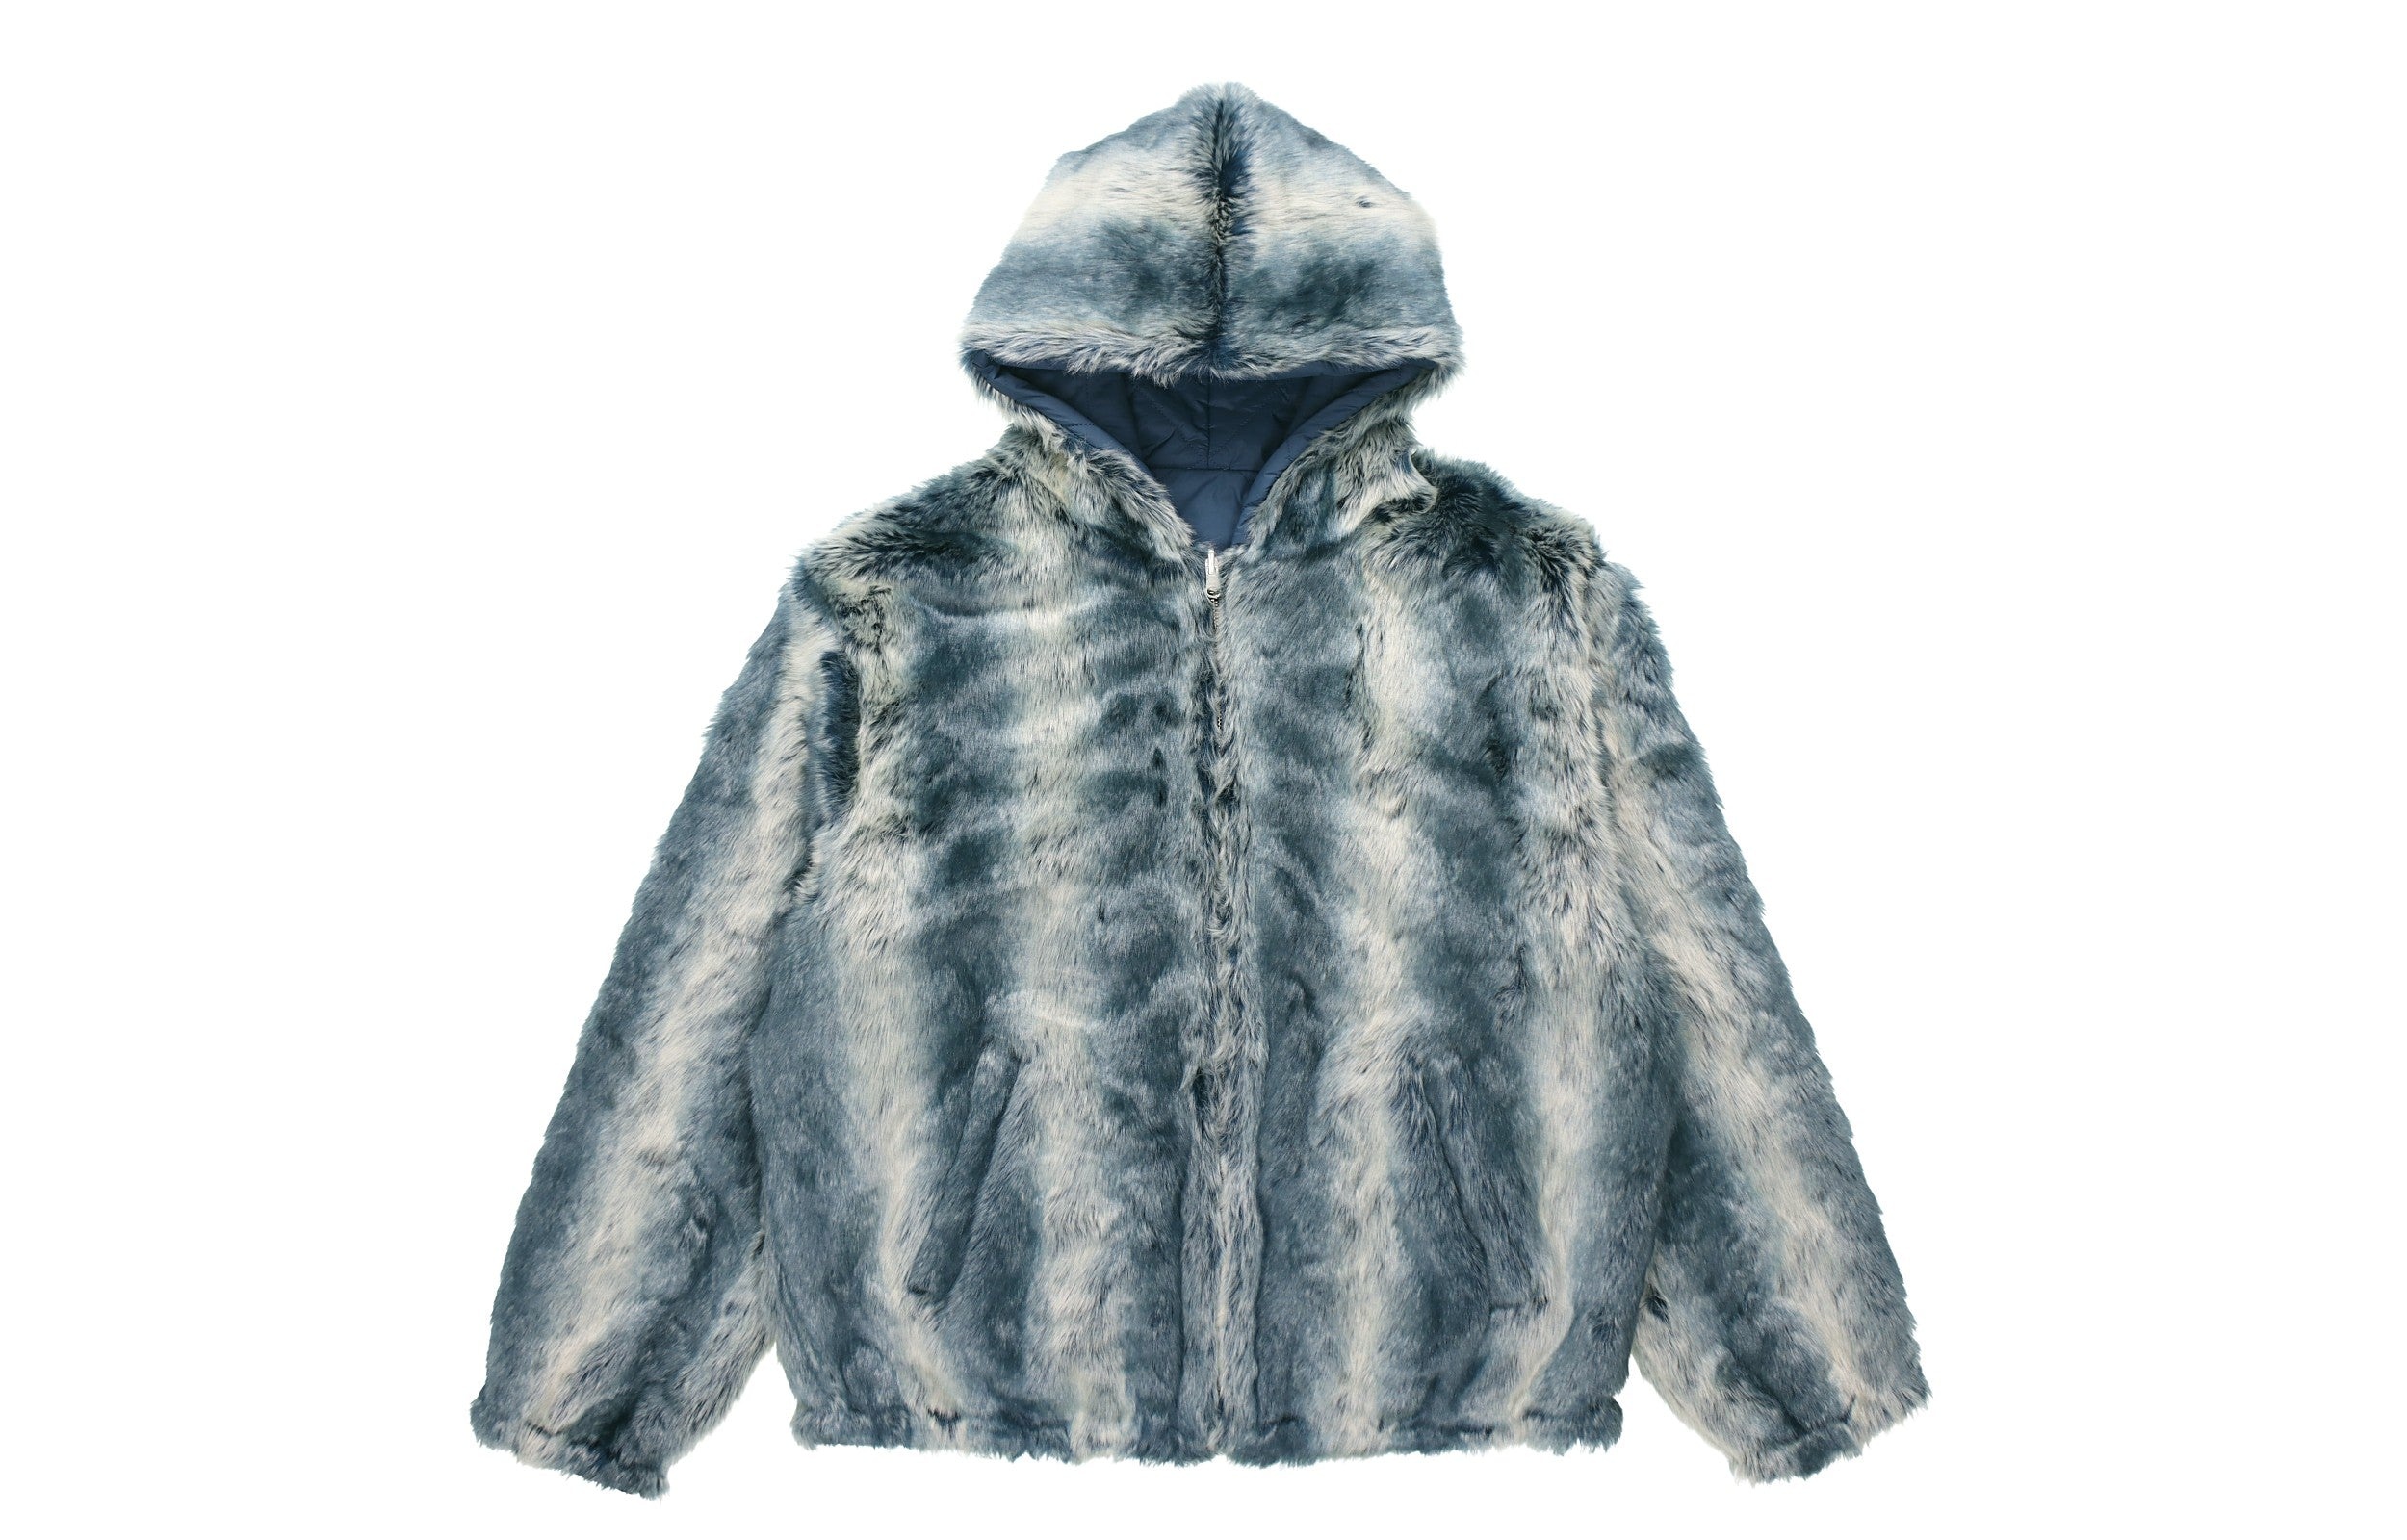 Supreme Faux Fur Reversible Hooded Jacket 'Teal White' SUP-FW20-318 - 1